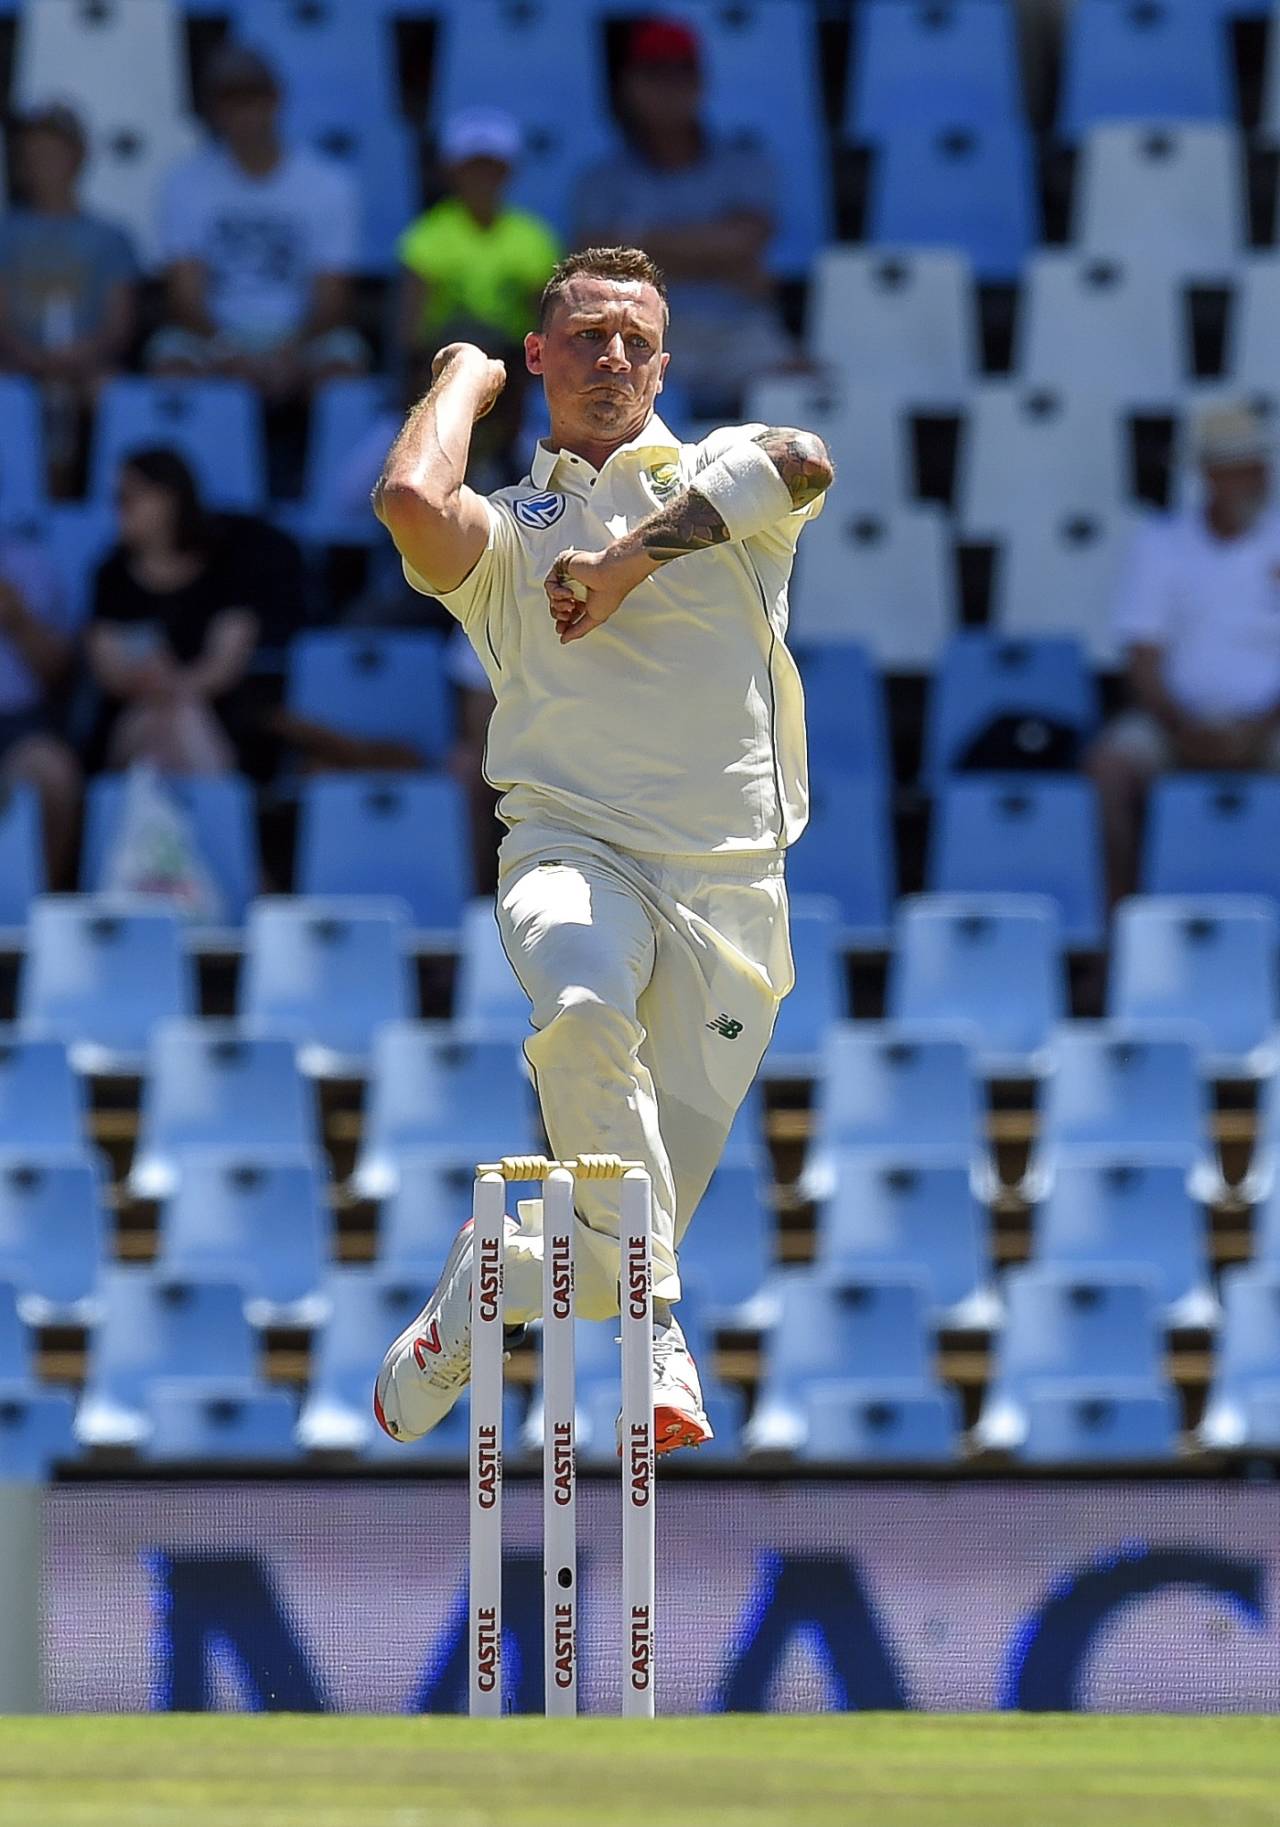 Dale Steyn about to let one fly, South Africa v Pakistan, 1st Test, Centurion, 1st day, December 26, 2018